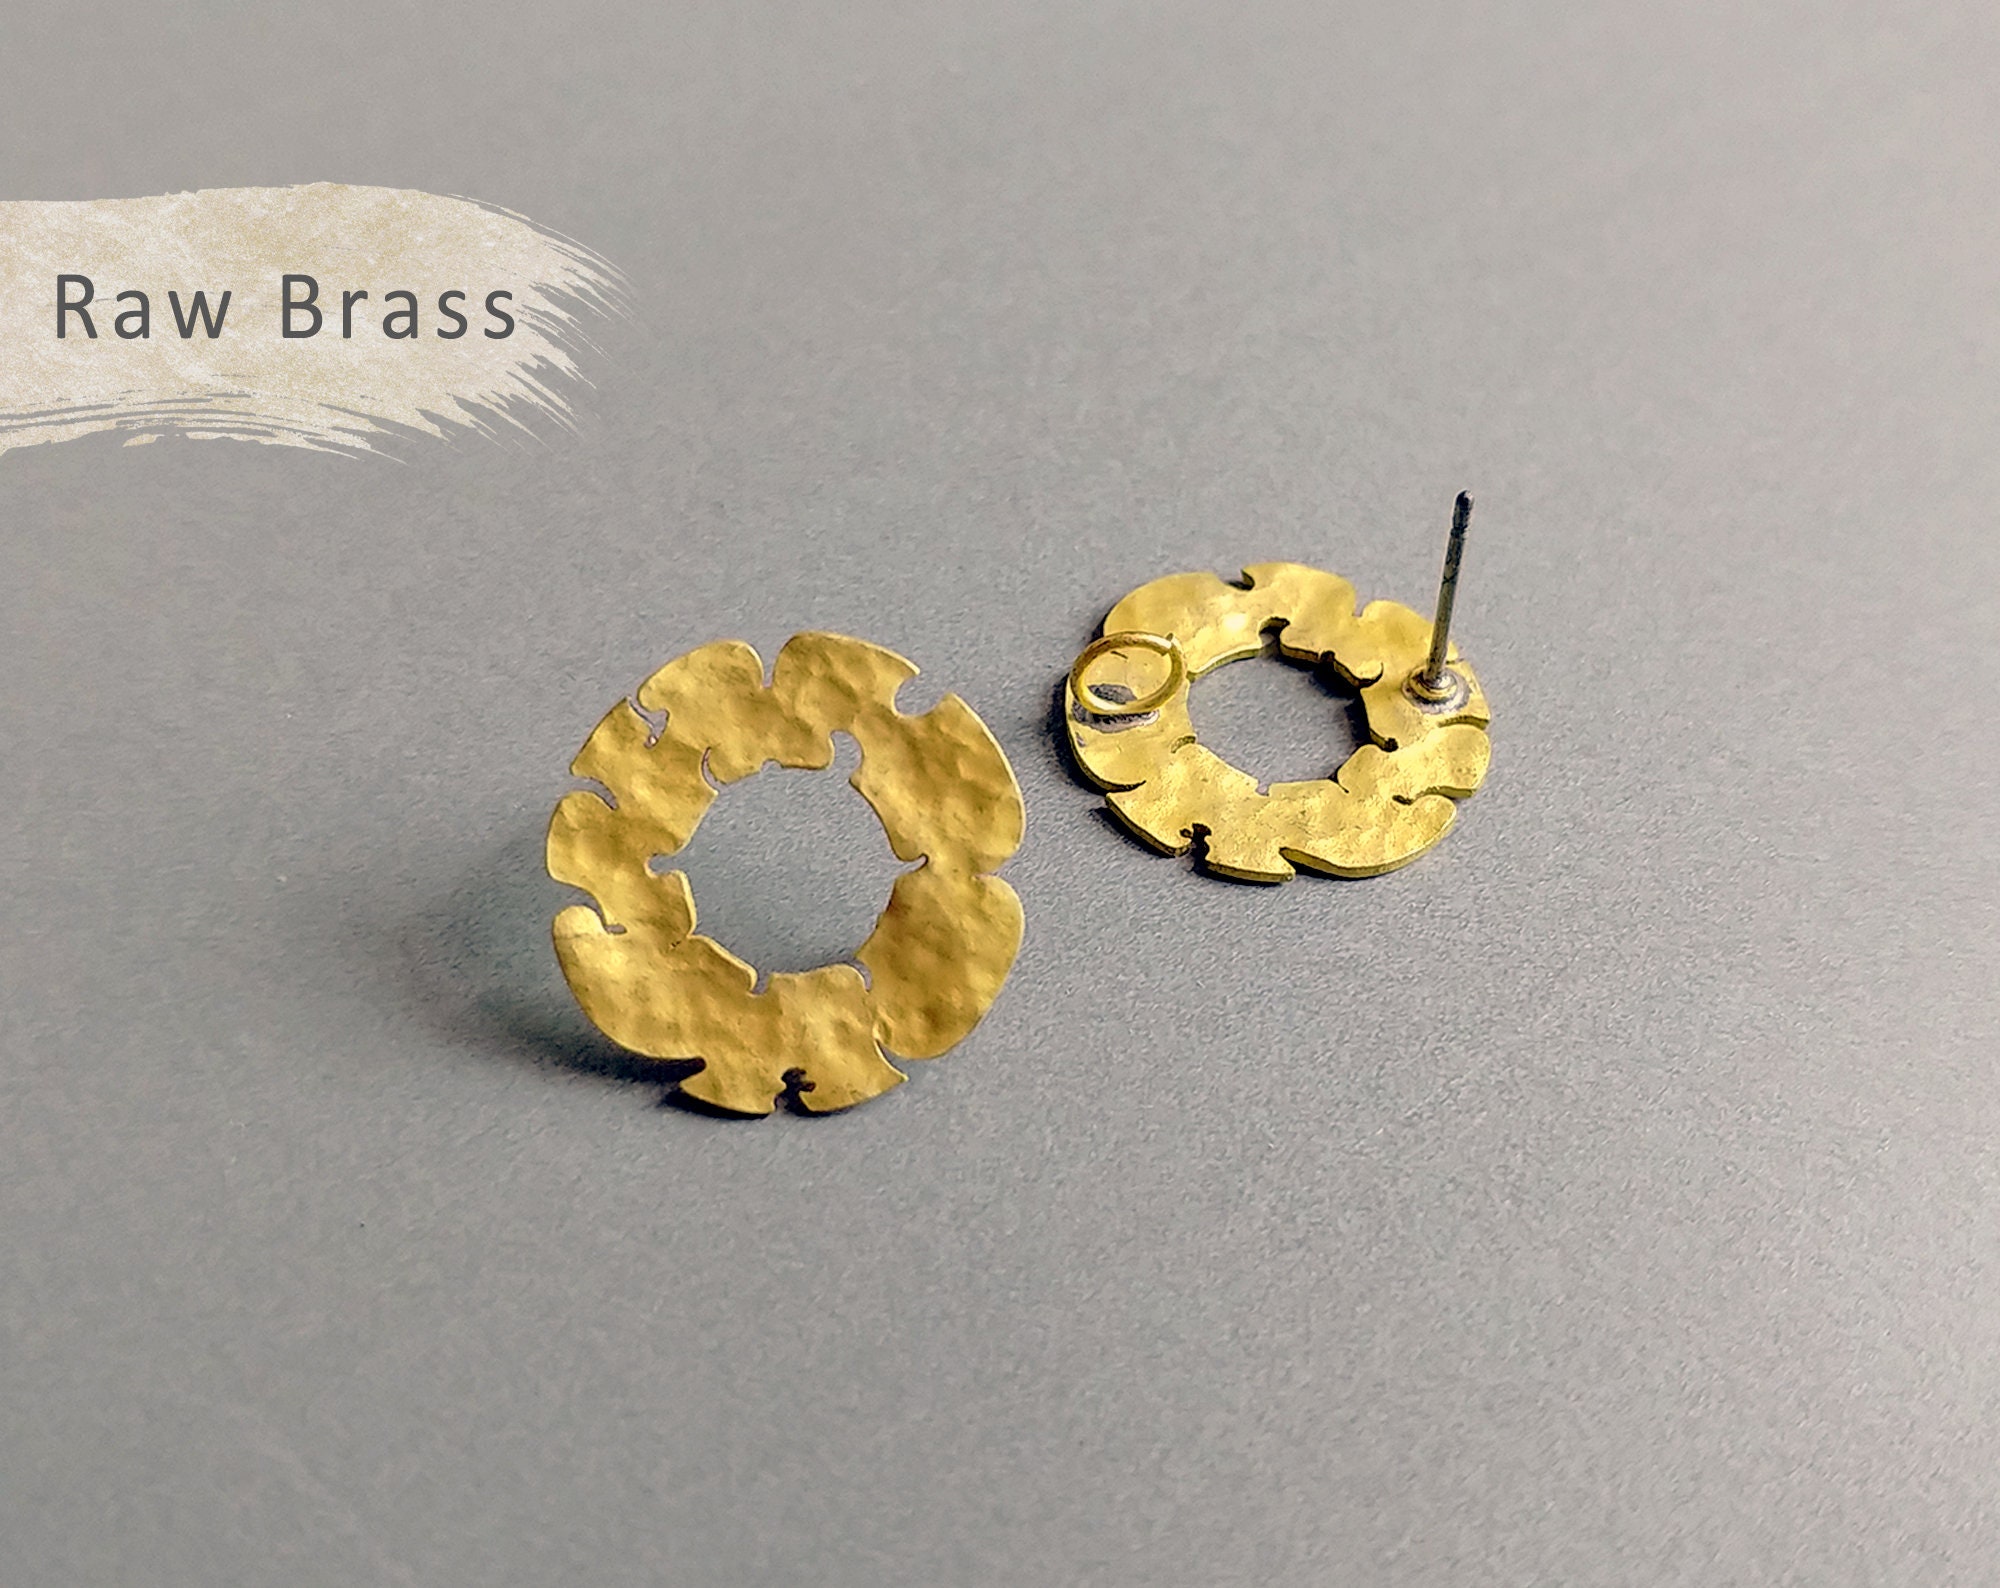 Round Raw Brass Textured Earring Findings for Jewelry Making. 2